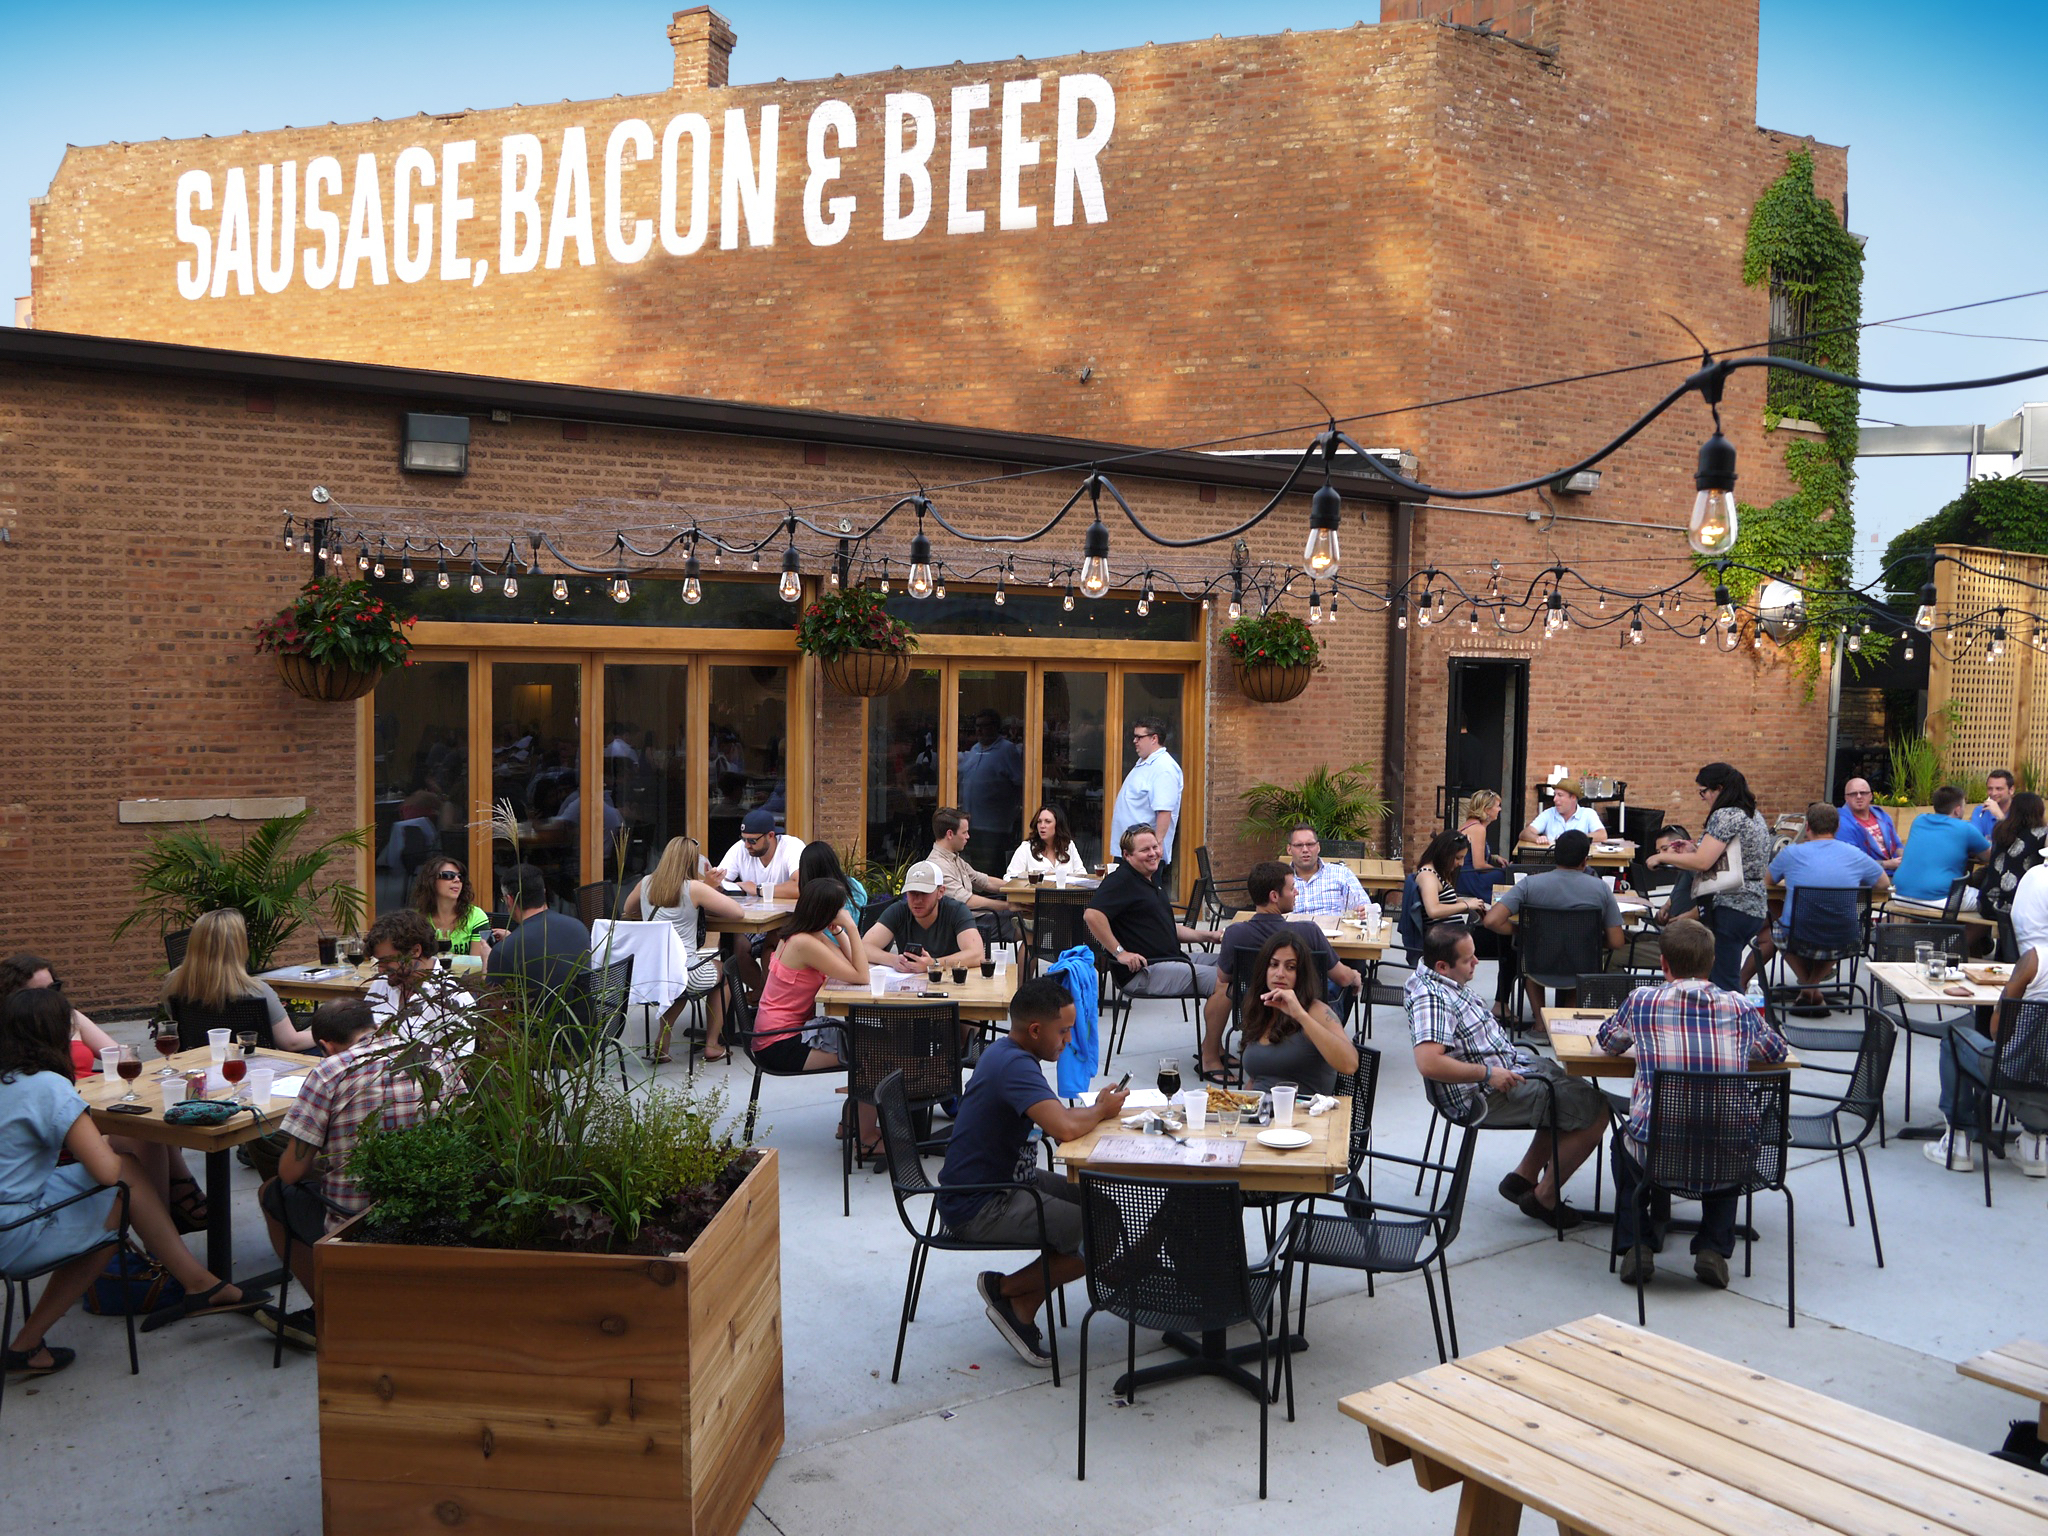 Best Outdoor Restaurants, Patios and Cafes in Chicago